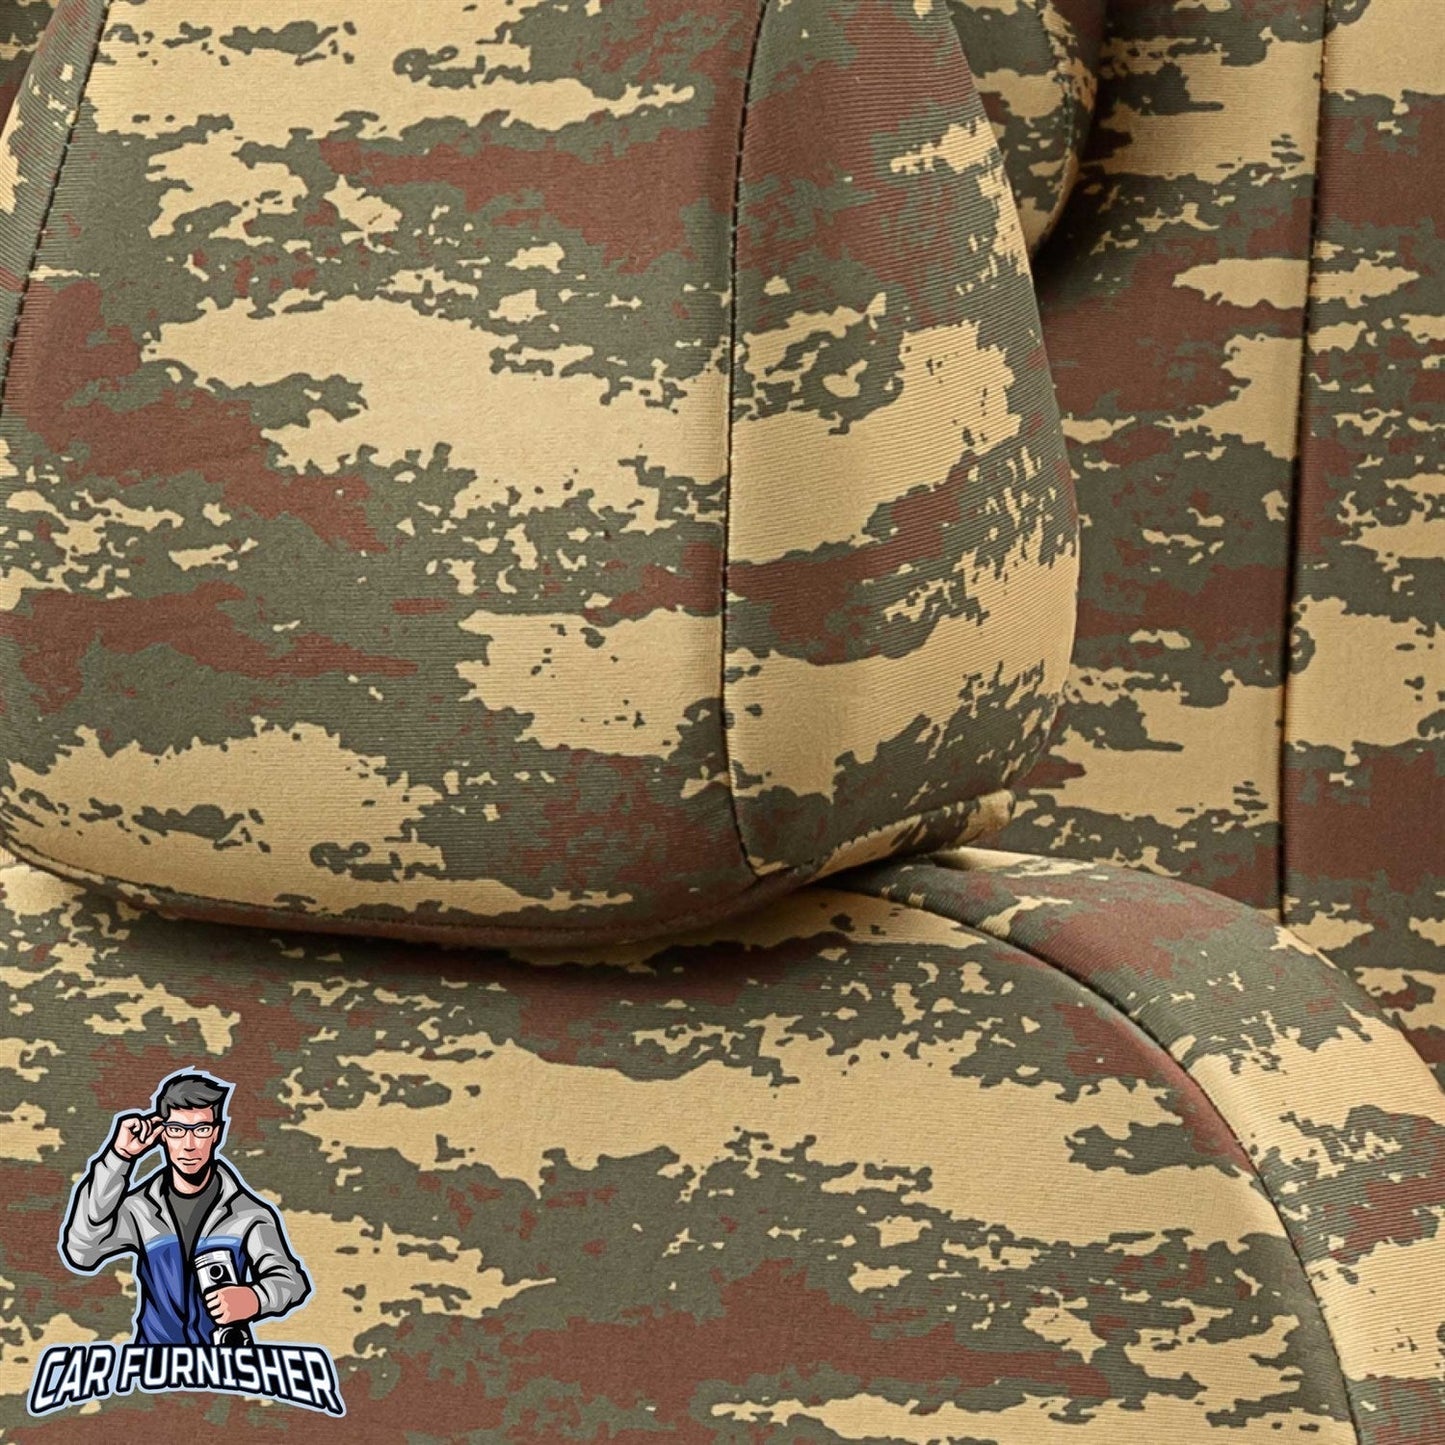 Ssangyong Musso Seat Covers Camouflage Waterproof Design Sierra Camo Waterproof Fabric